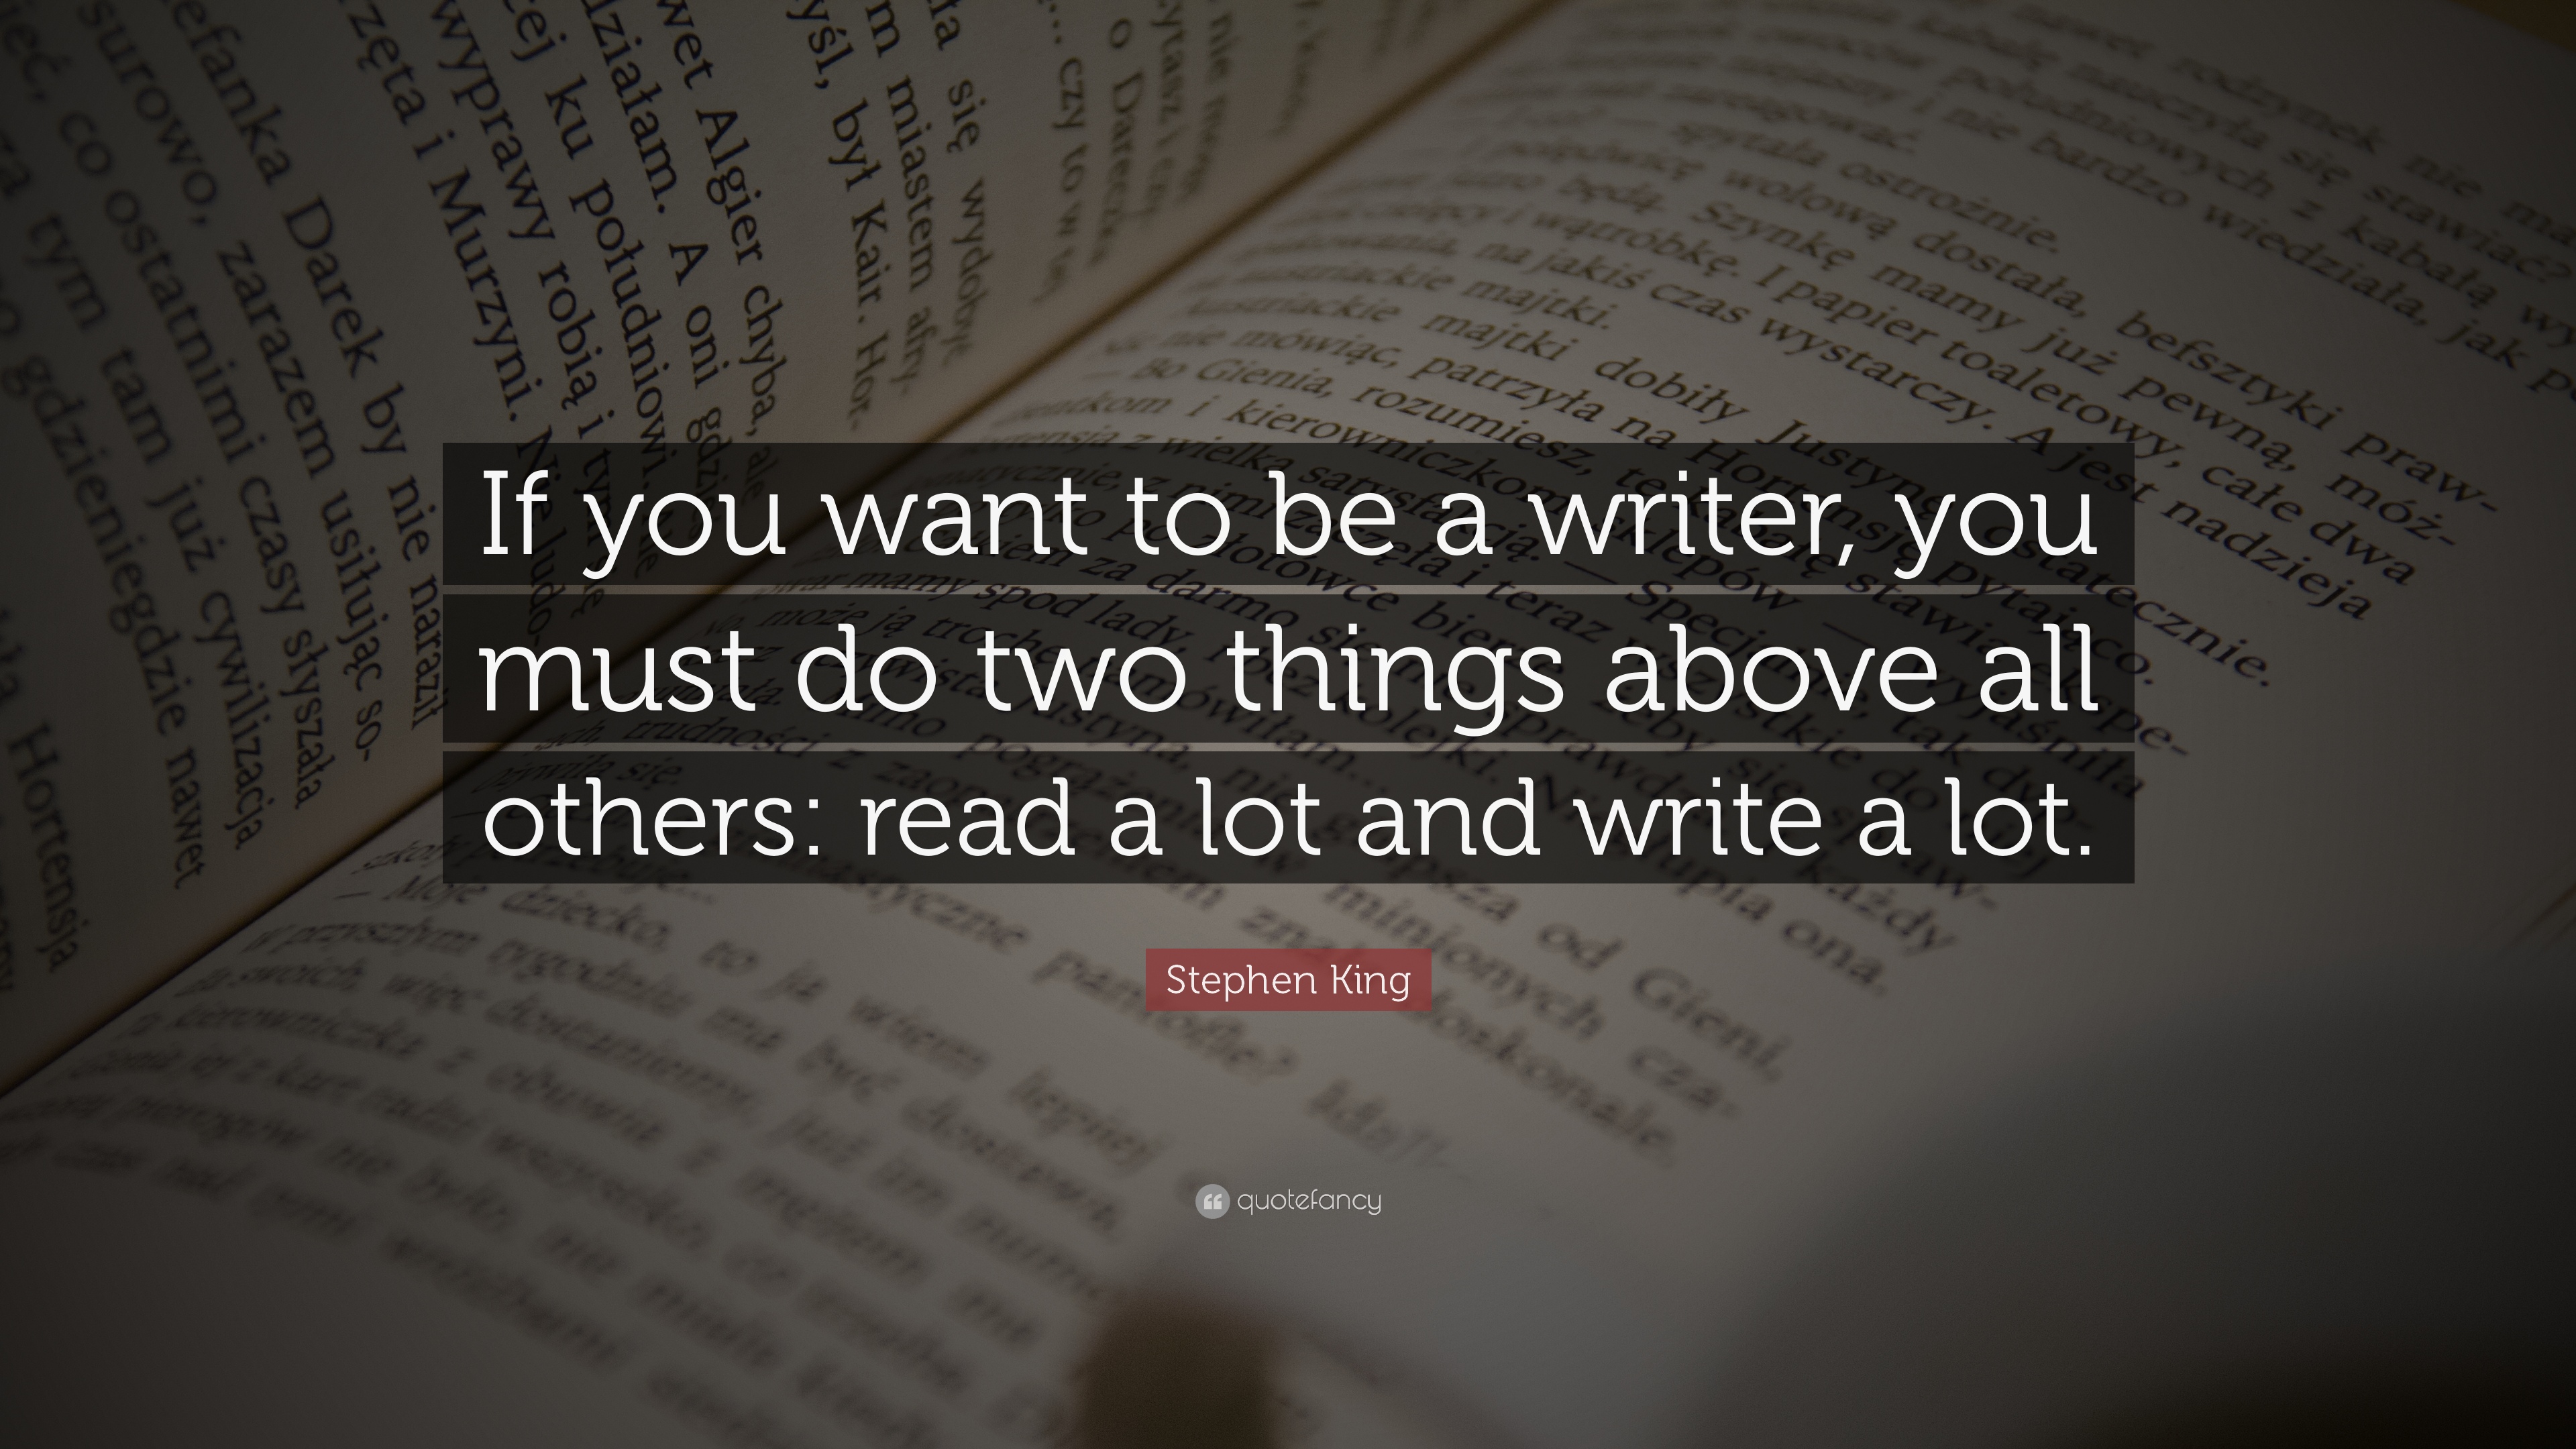 Stephen King If You Want to be A Writer Quote